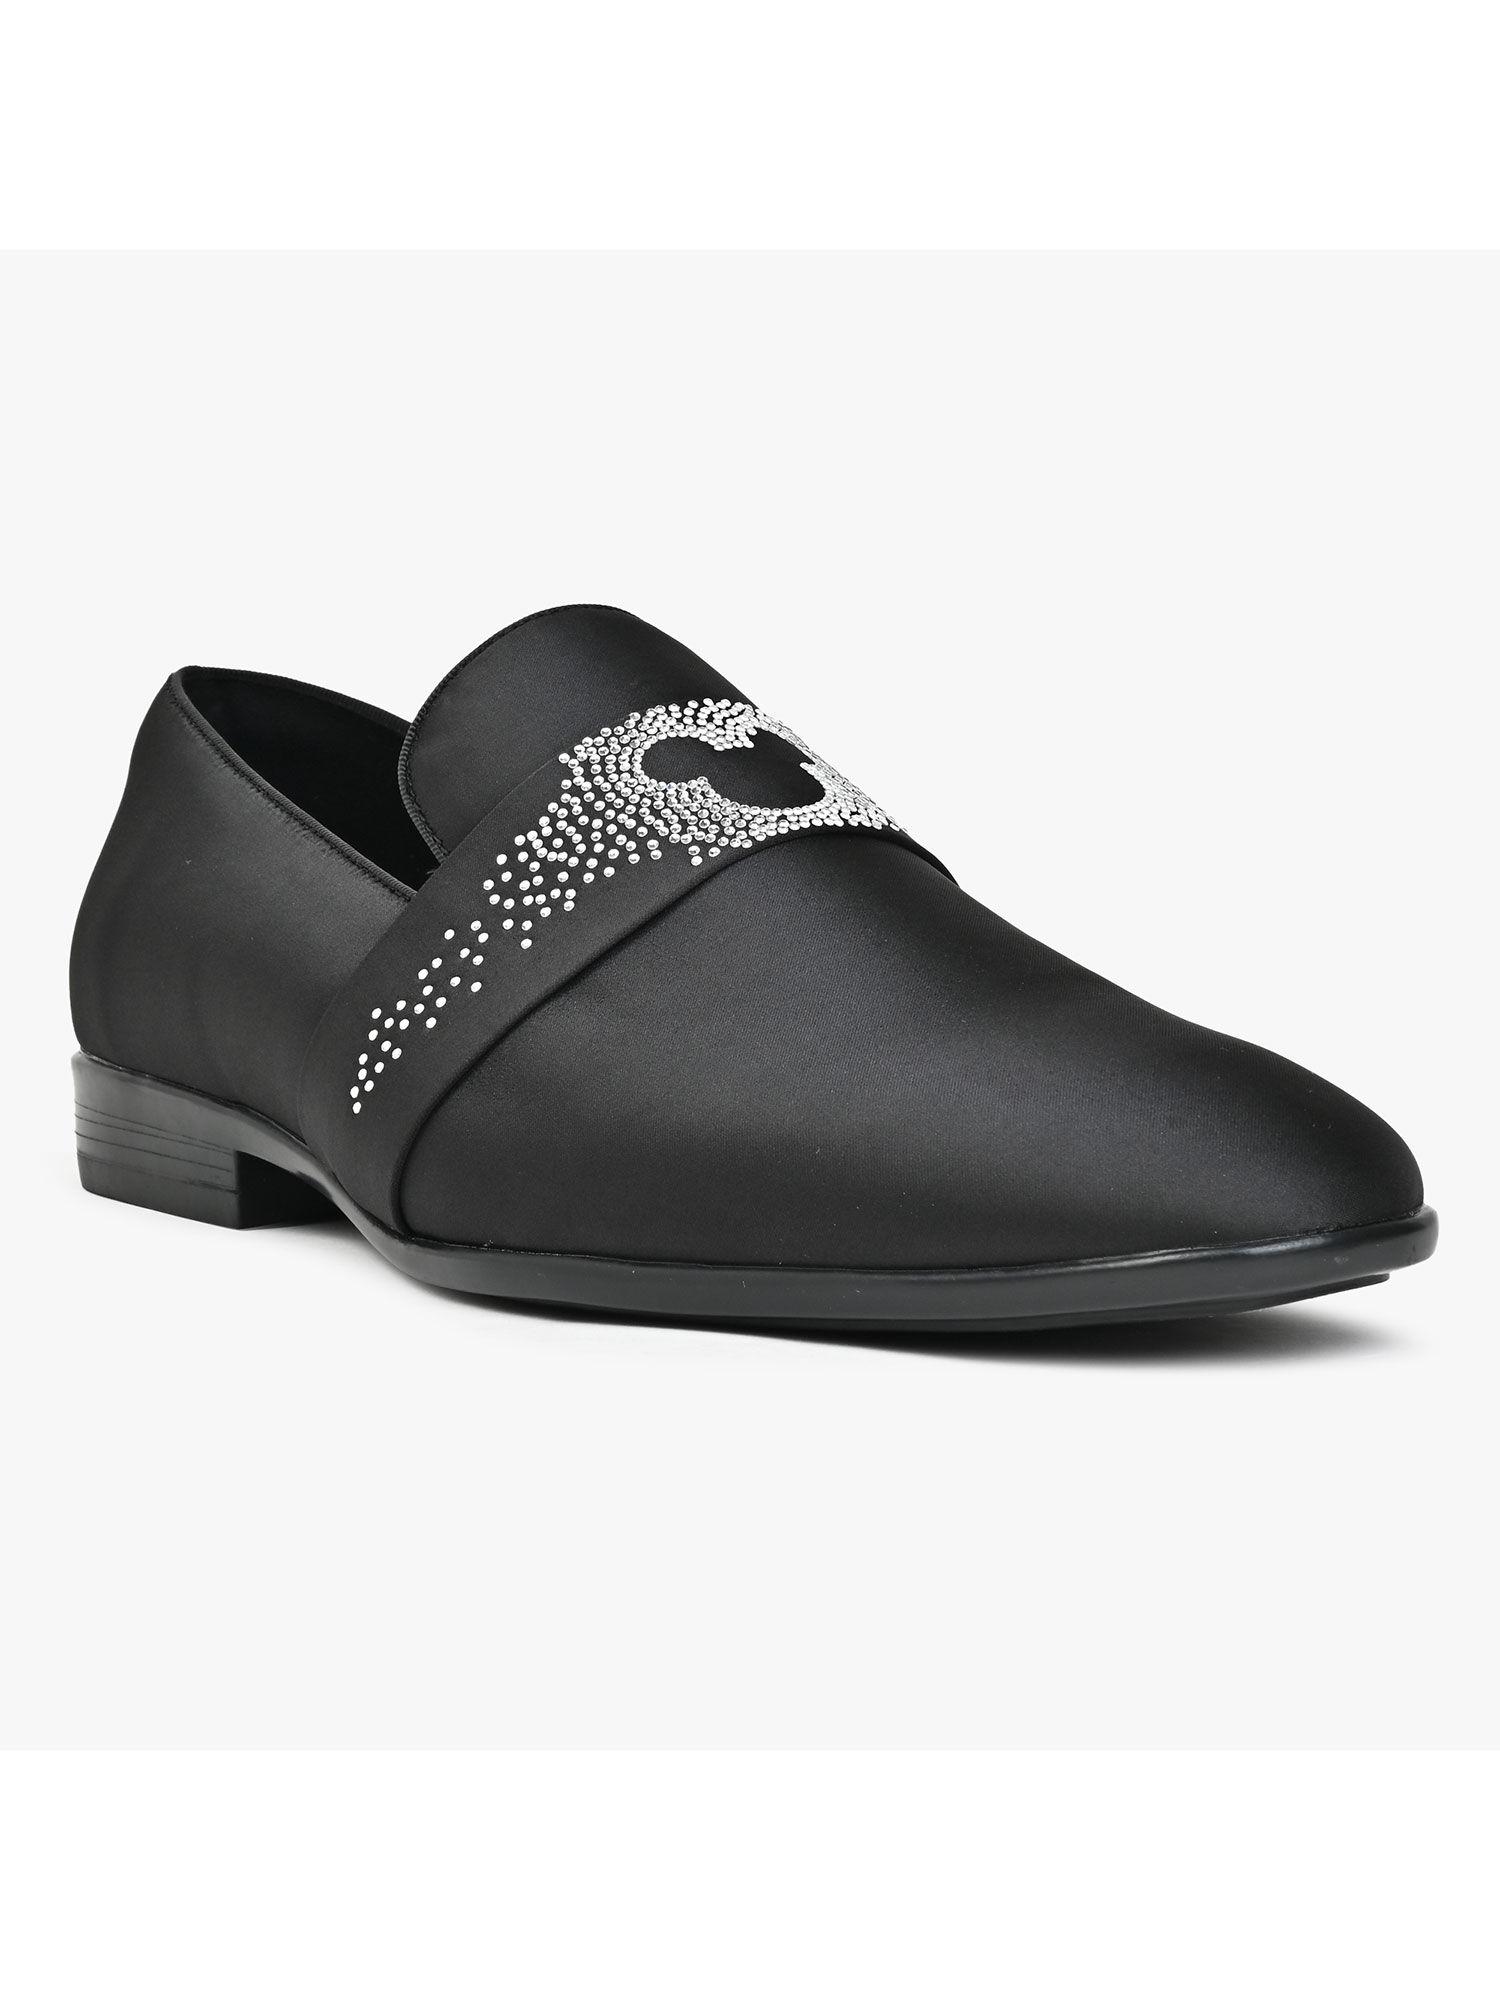 men casual loafers black